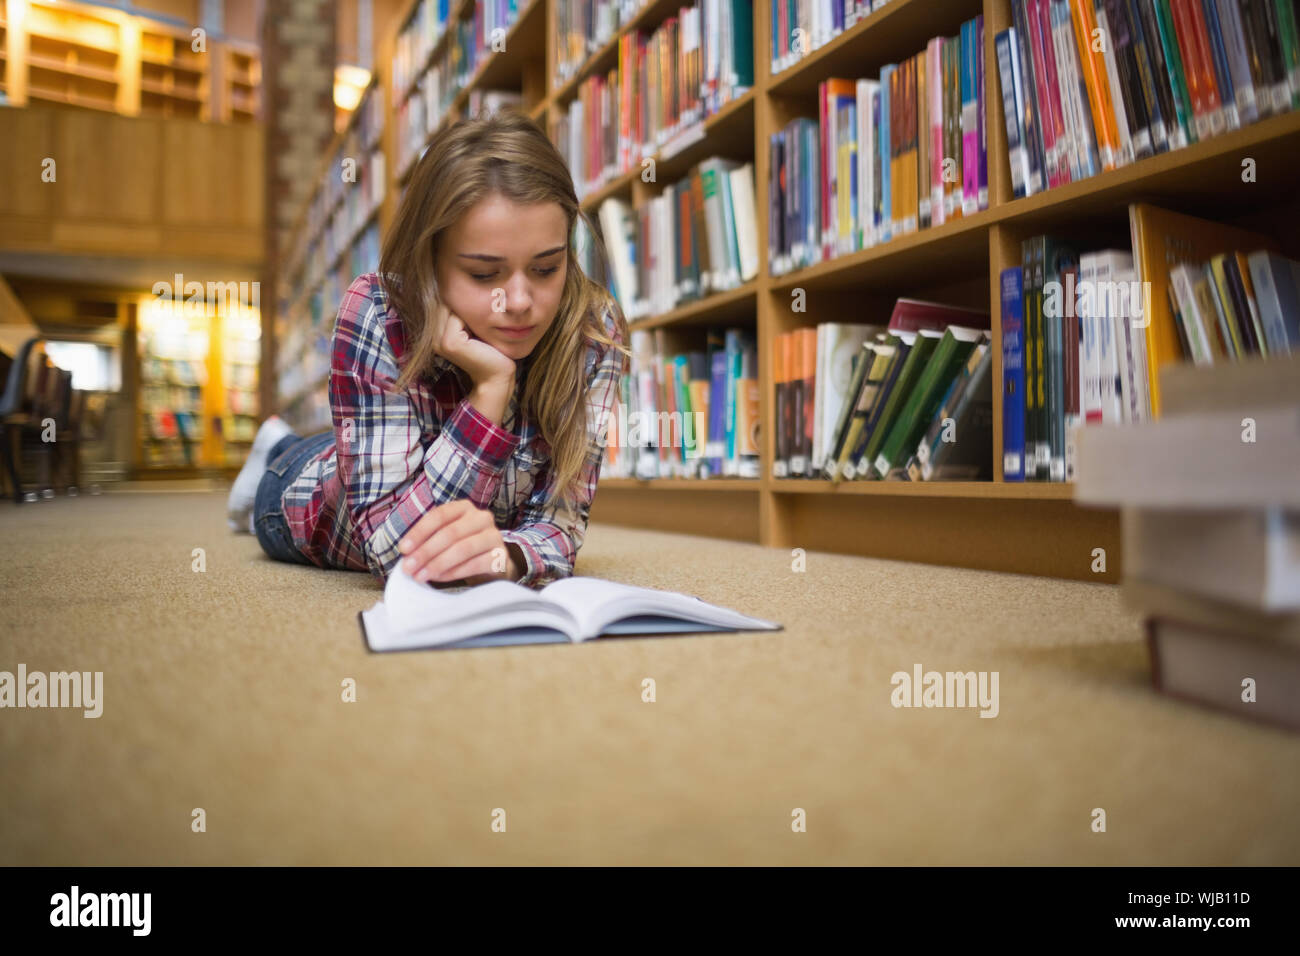 Pretty focused student lying on library floor reading book Stock Photo